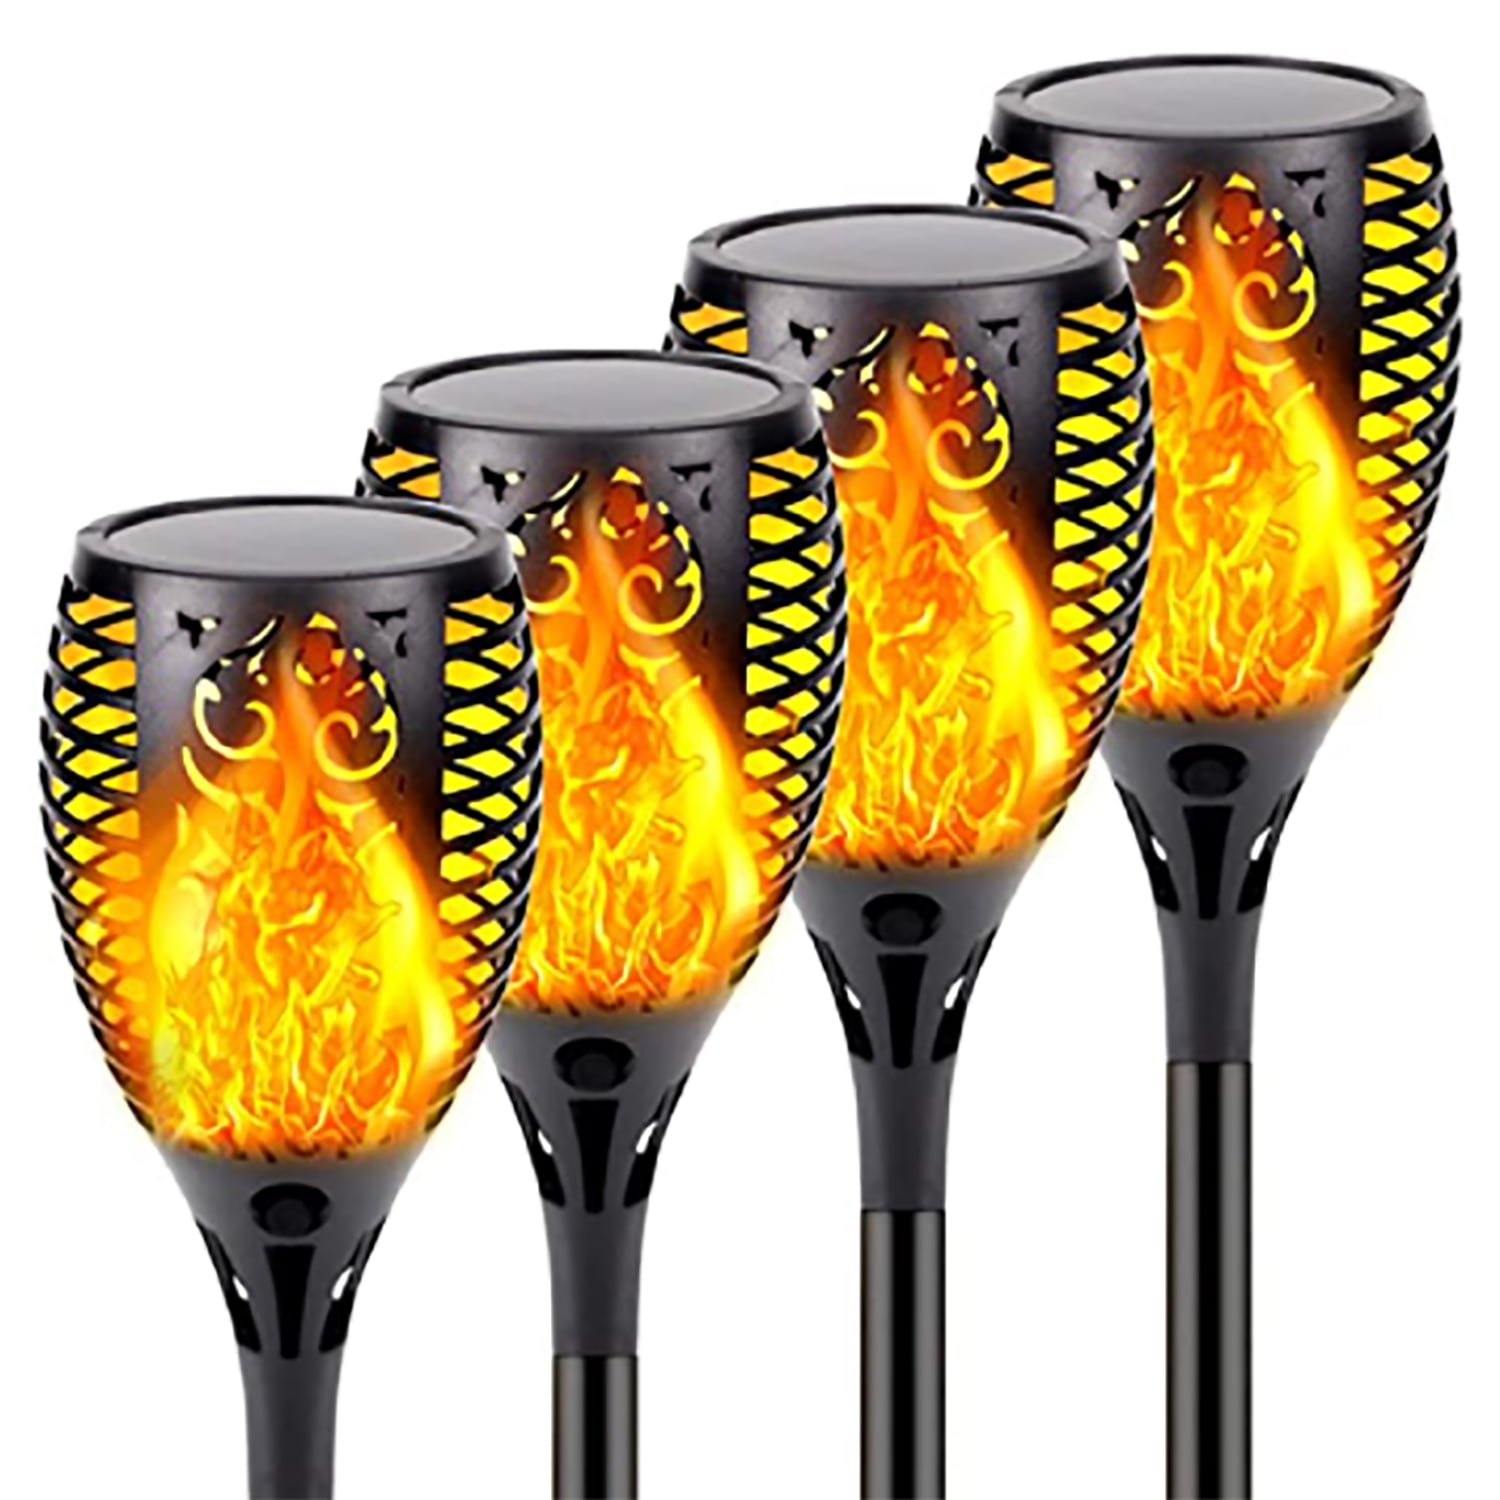 2 Packs Solar Torch Light with Flickering Flame Shinmax Dancing Flame Torch Lights Outdoor 96 LED Auto On/Off Dusk to Dawn IP65 Security Decoration Lights for Waterproof Garden Pathway&Patio Driveway 